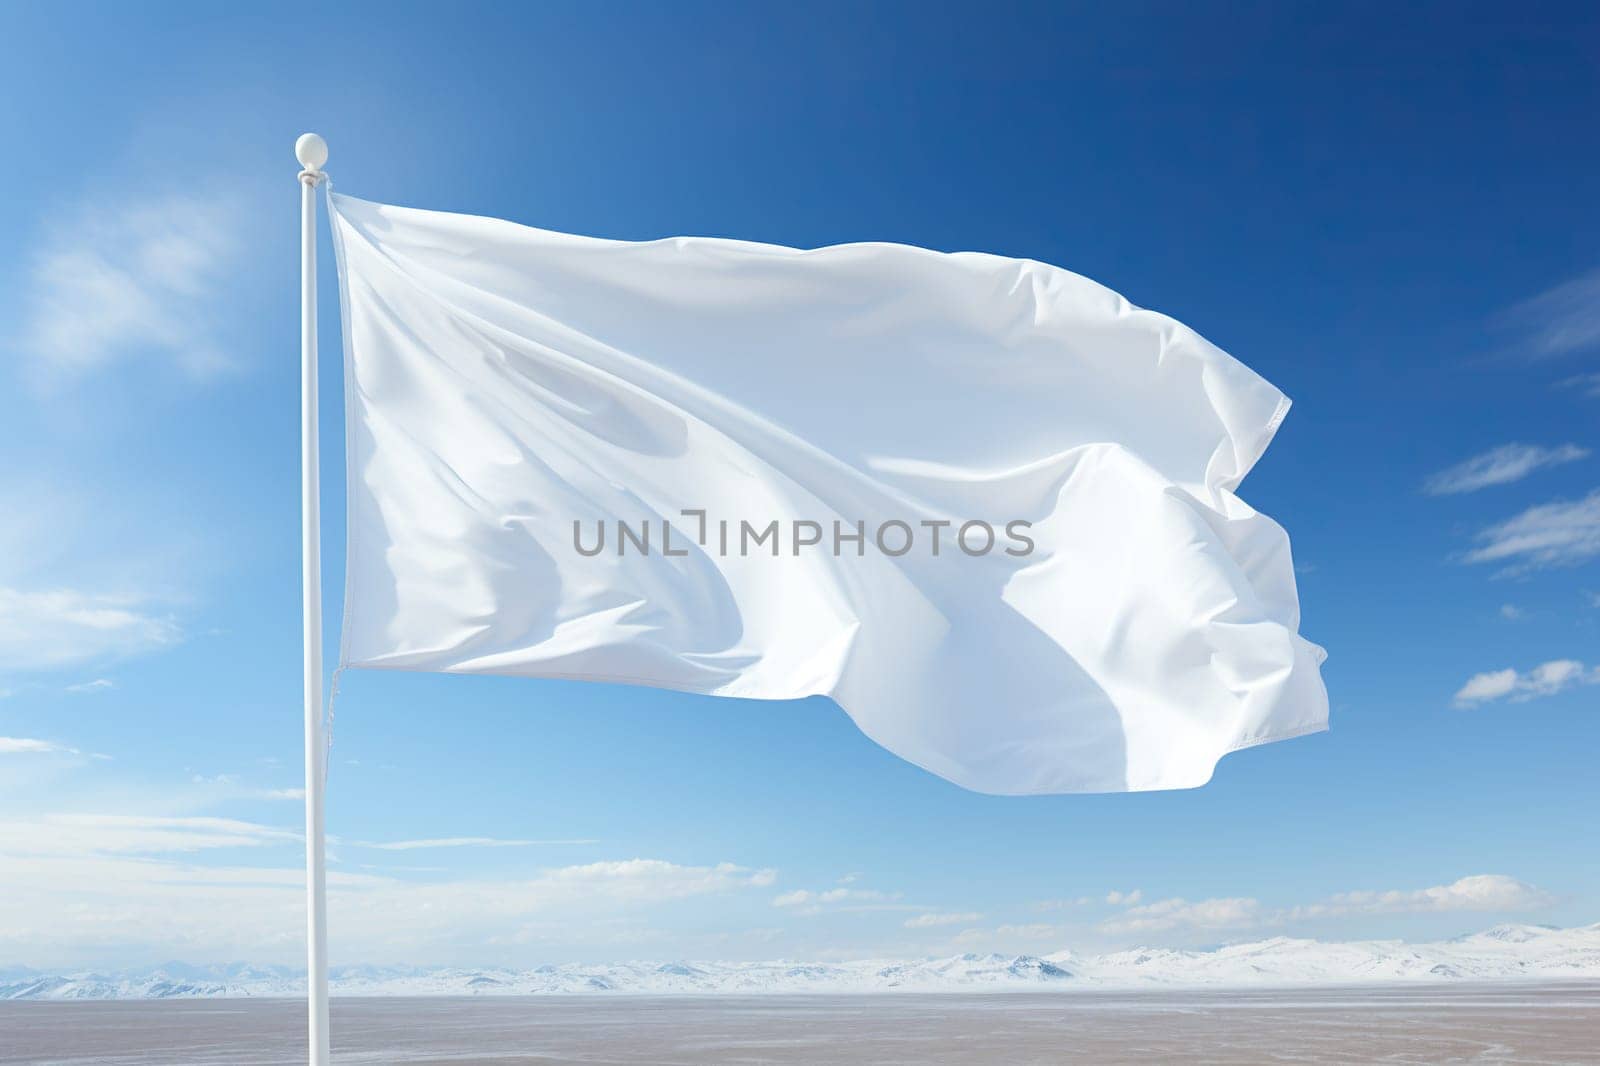 An empty white waving flag on a clear sky in a vacant lot.